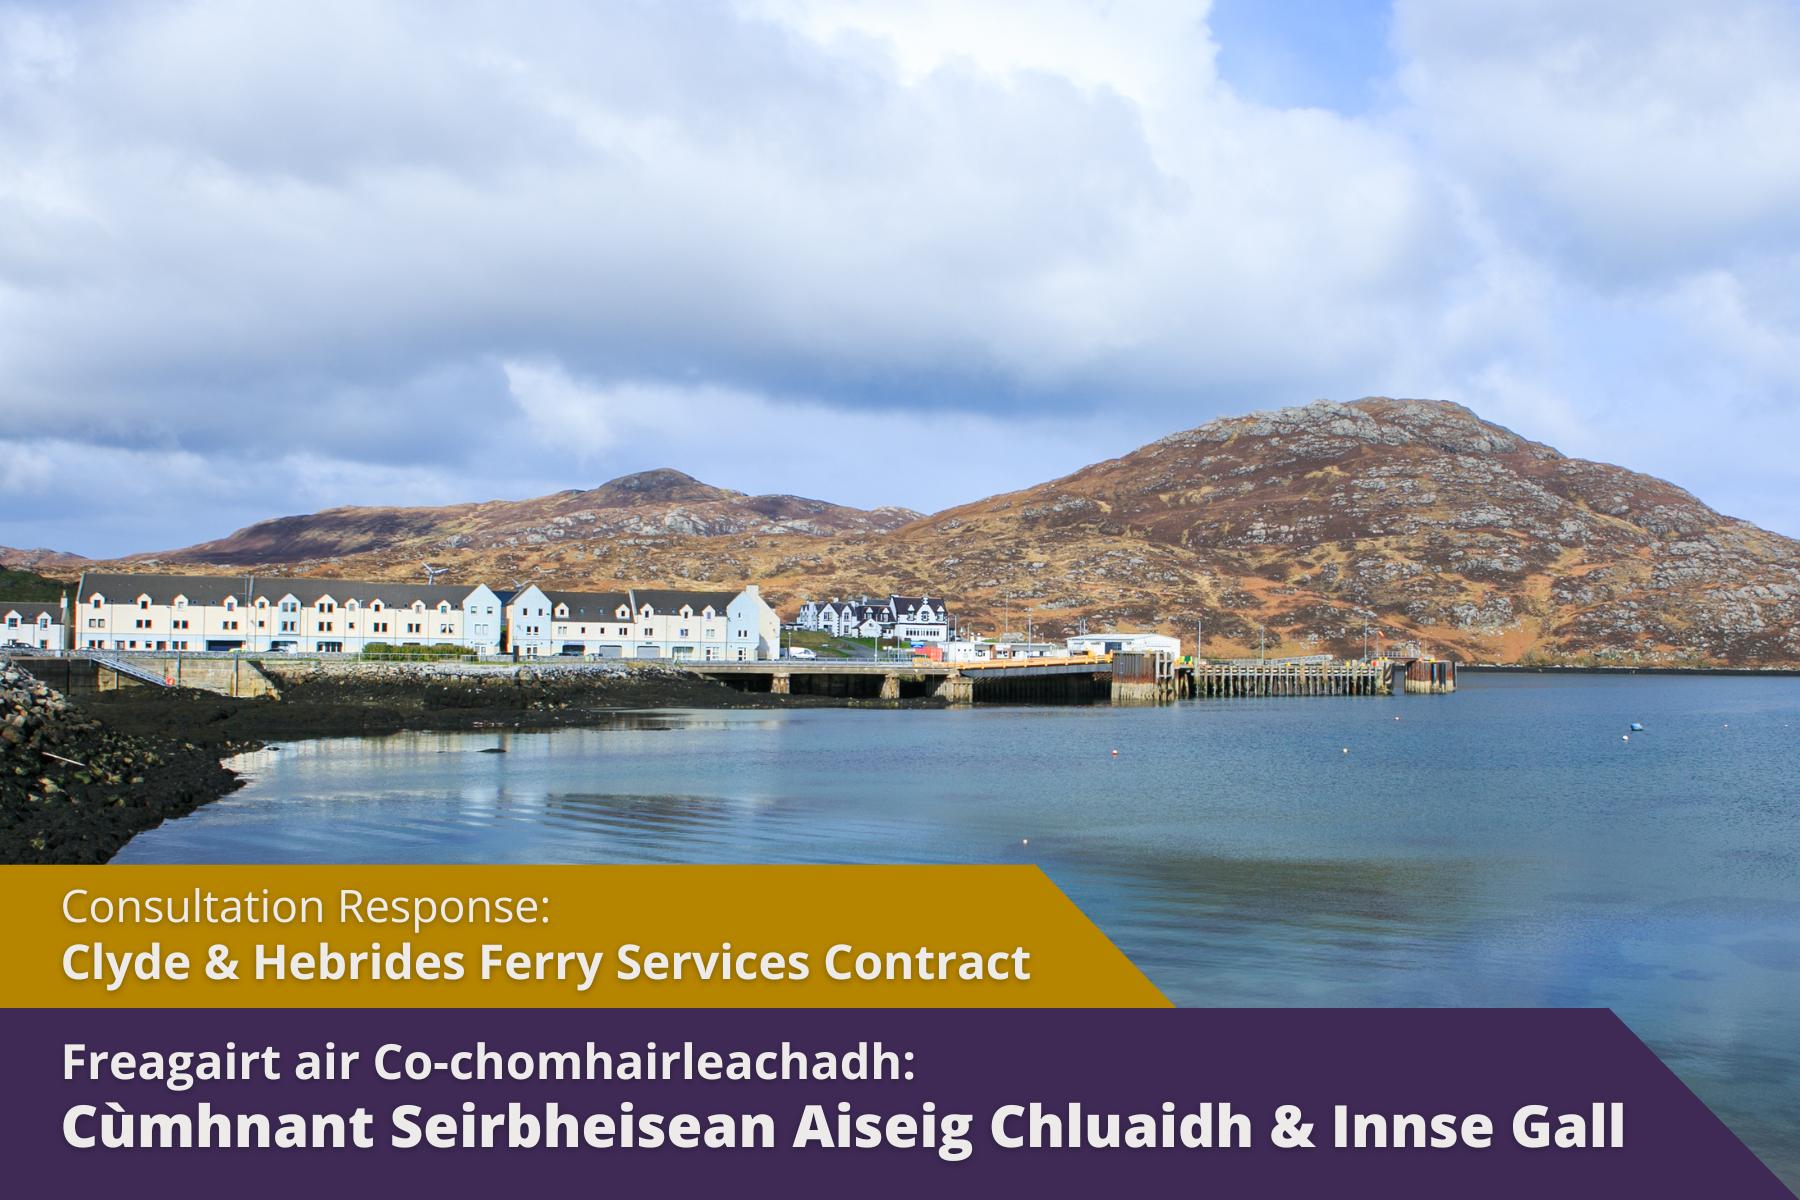 Consultation Response: Clyde & Hebrides Ferry Services Contract